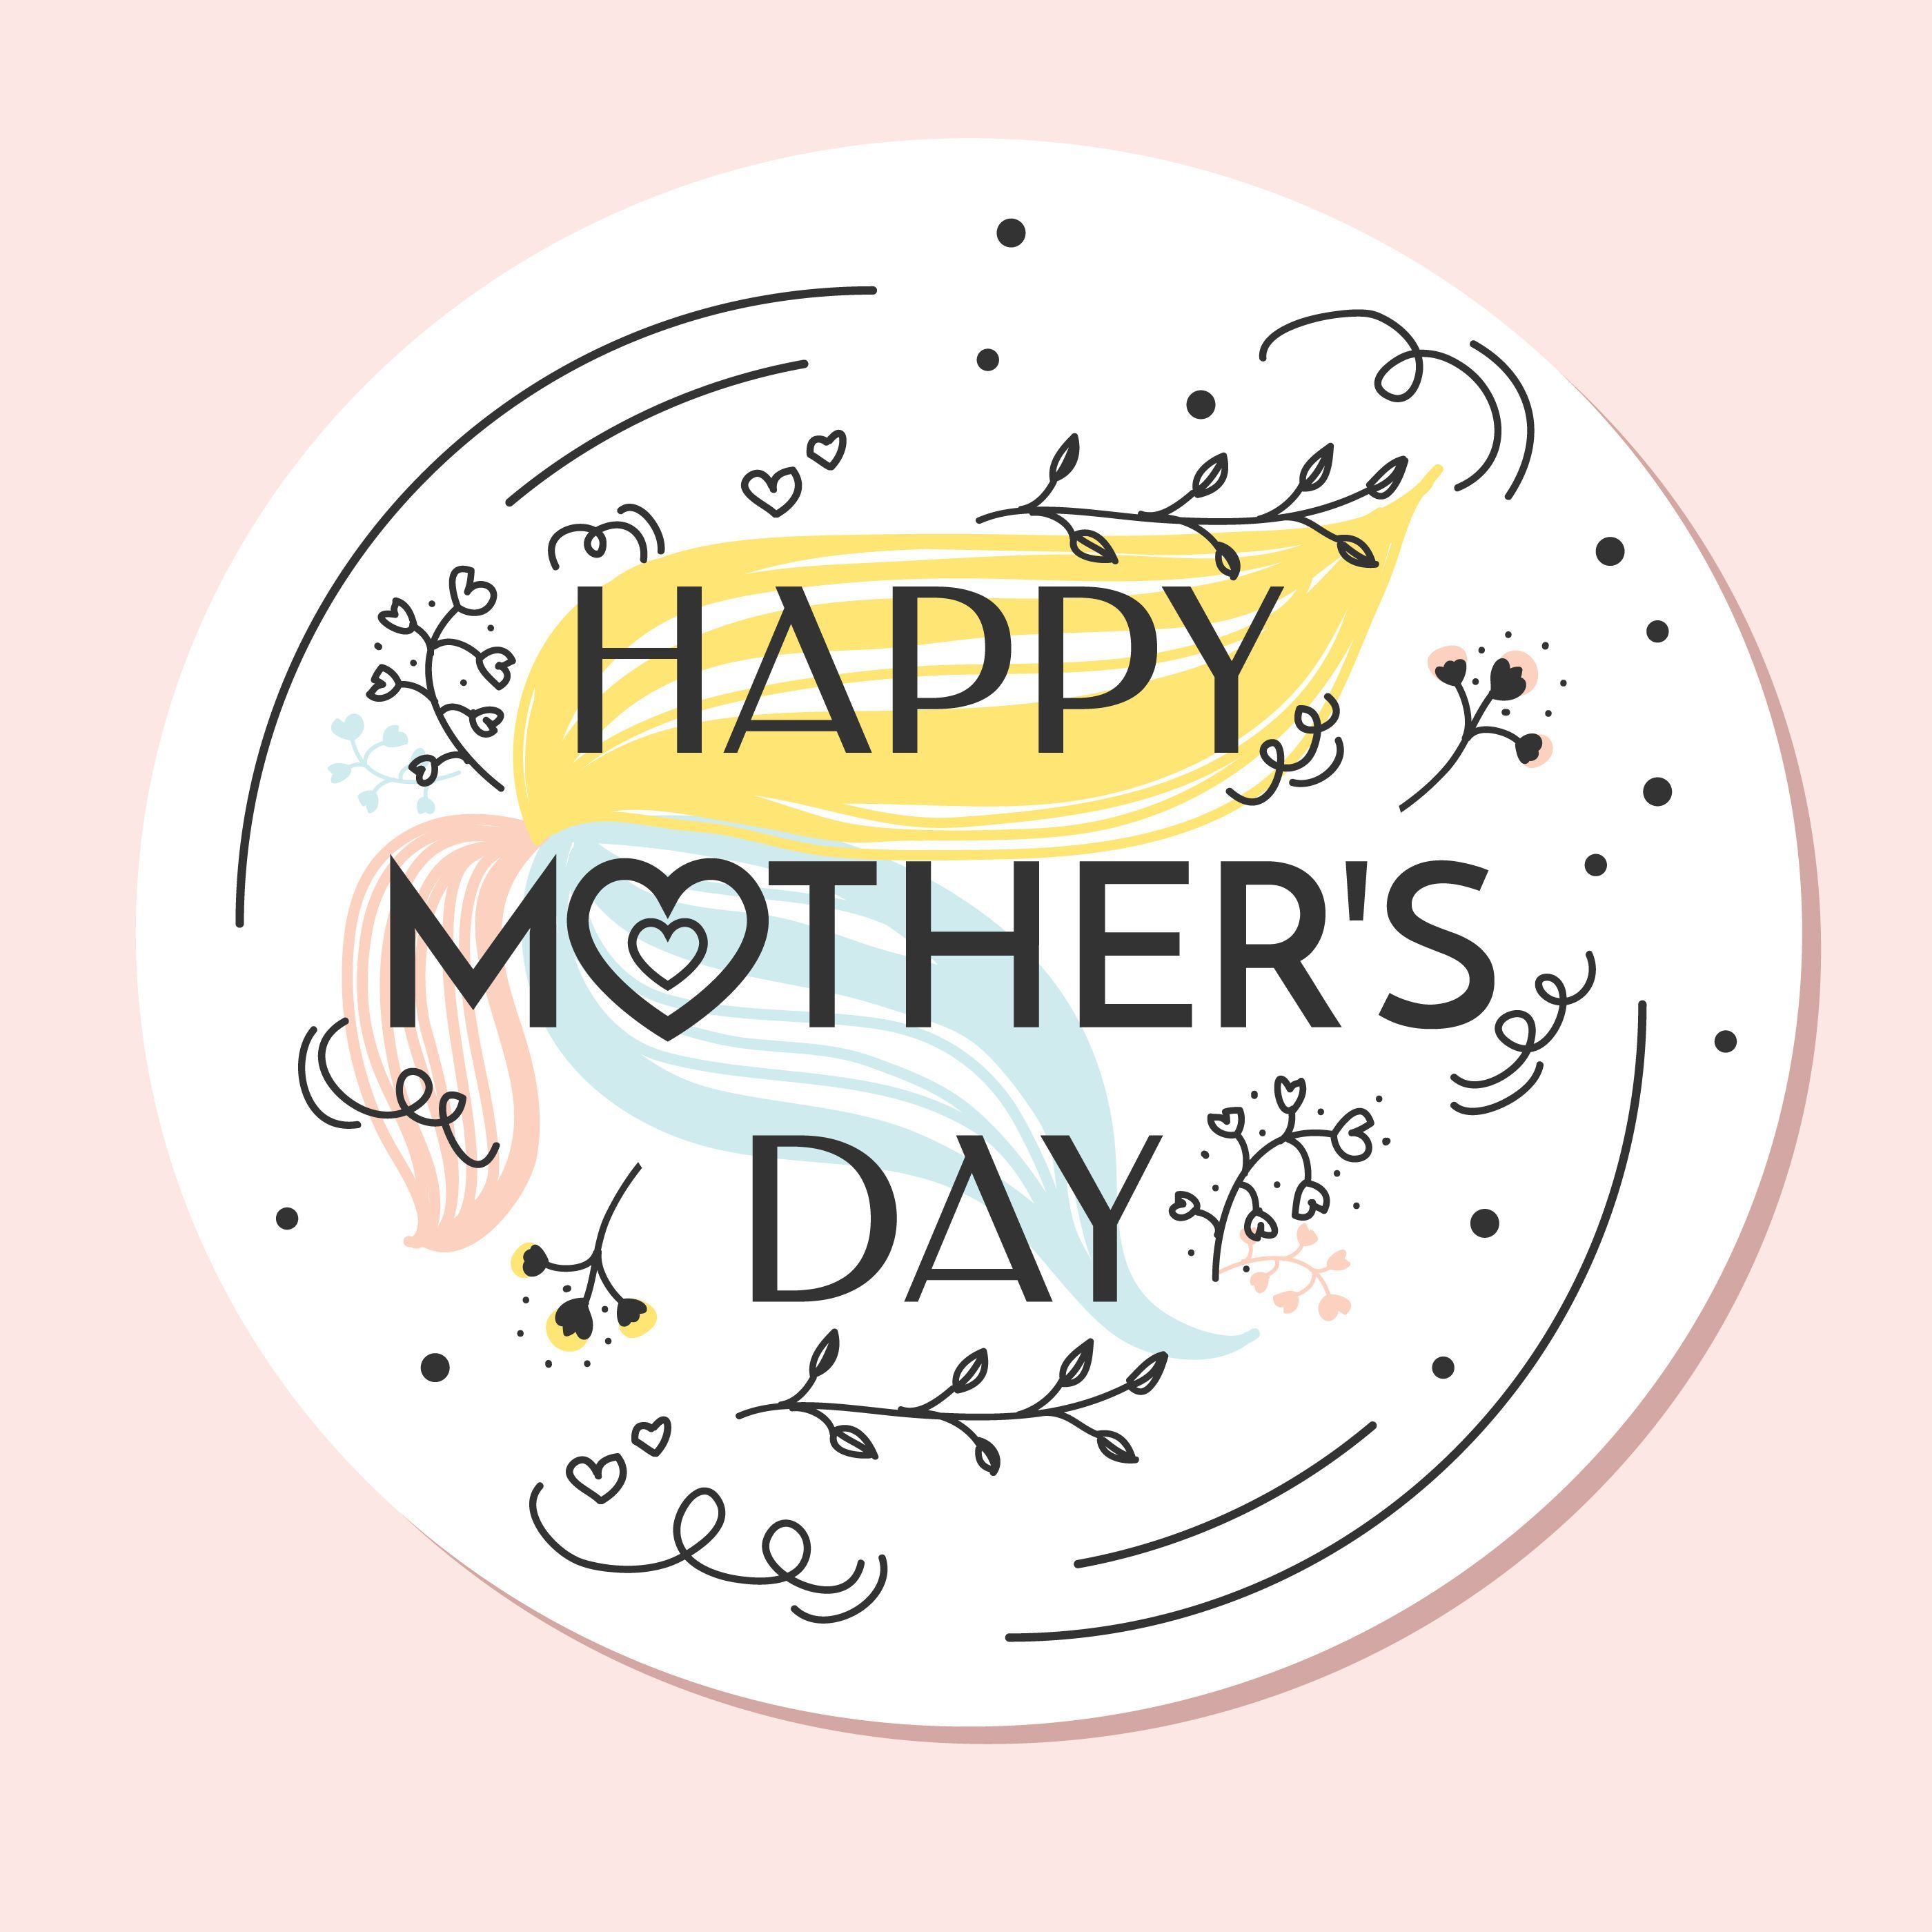 Happy Mothers Day Vector. Choose from thousands of free vectors, clip art designs, icons, and ill. Happy mothers day image, Mothers day image, Happy mothers day